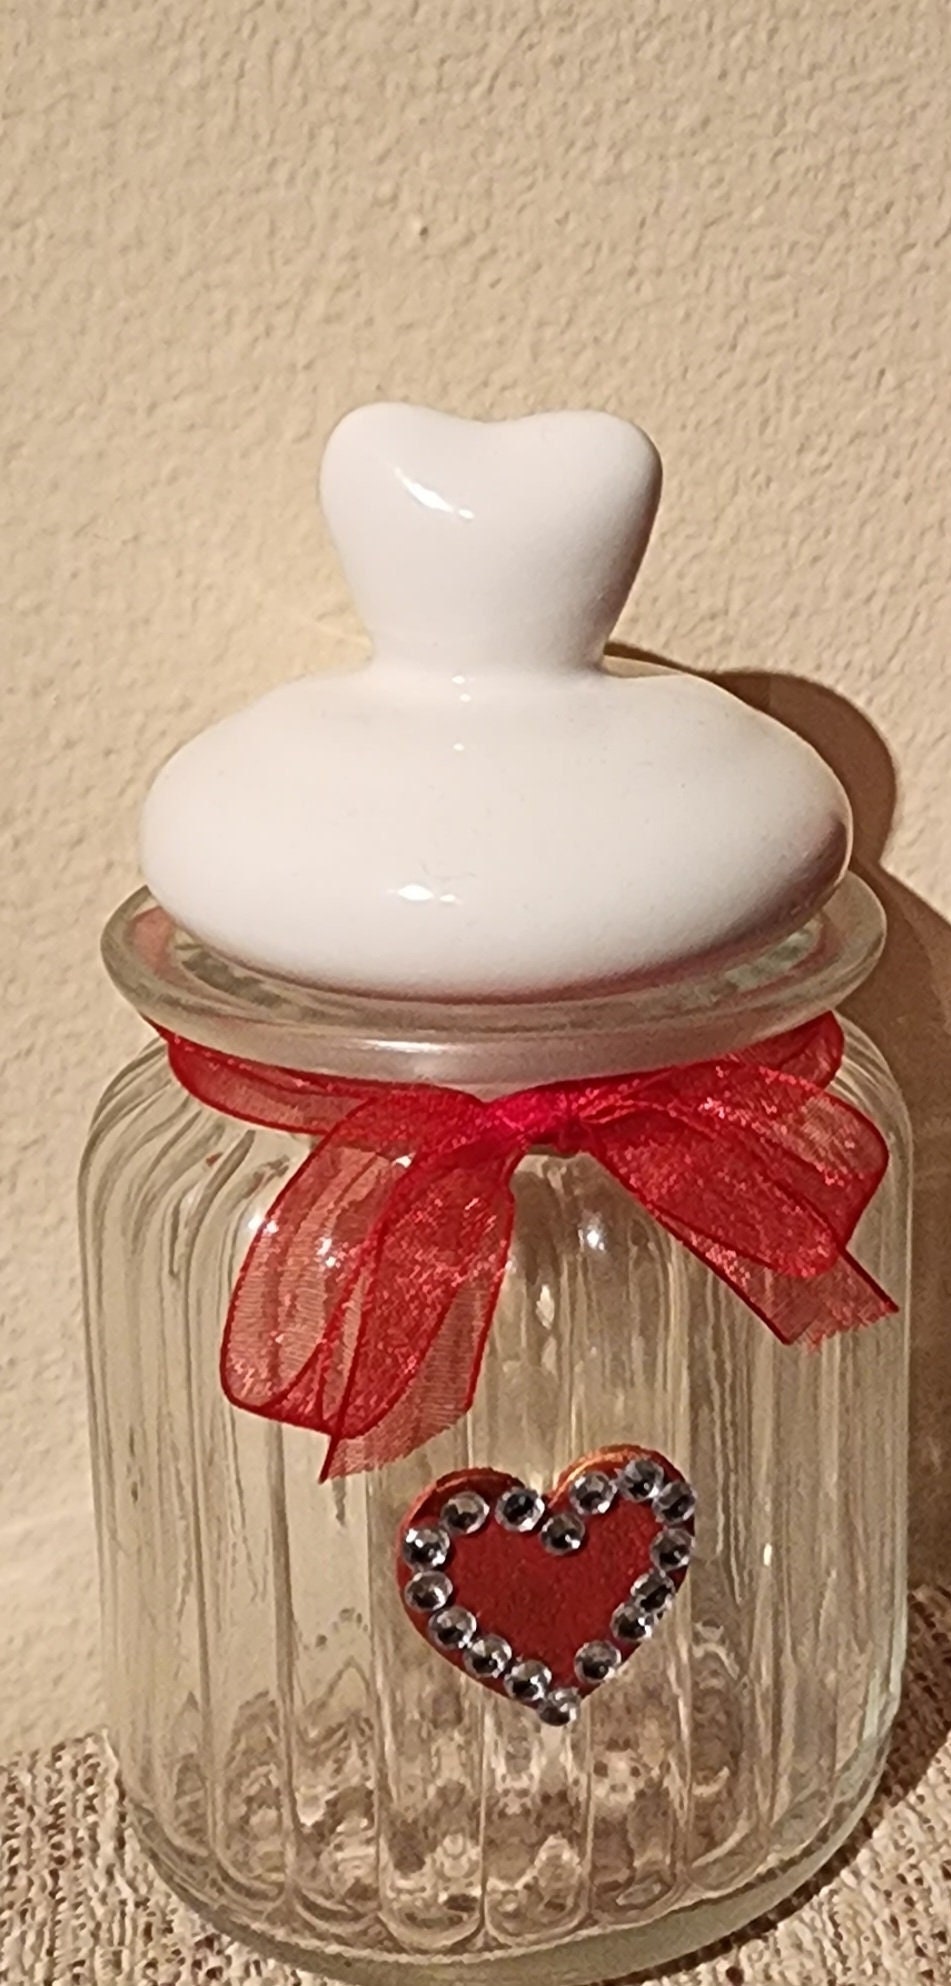 5oz. Glass Heart-shaped Jars. You May Purchase Empty, or With  Personalization or Intentions 